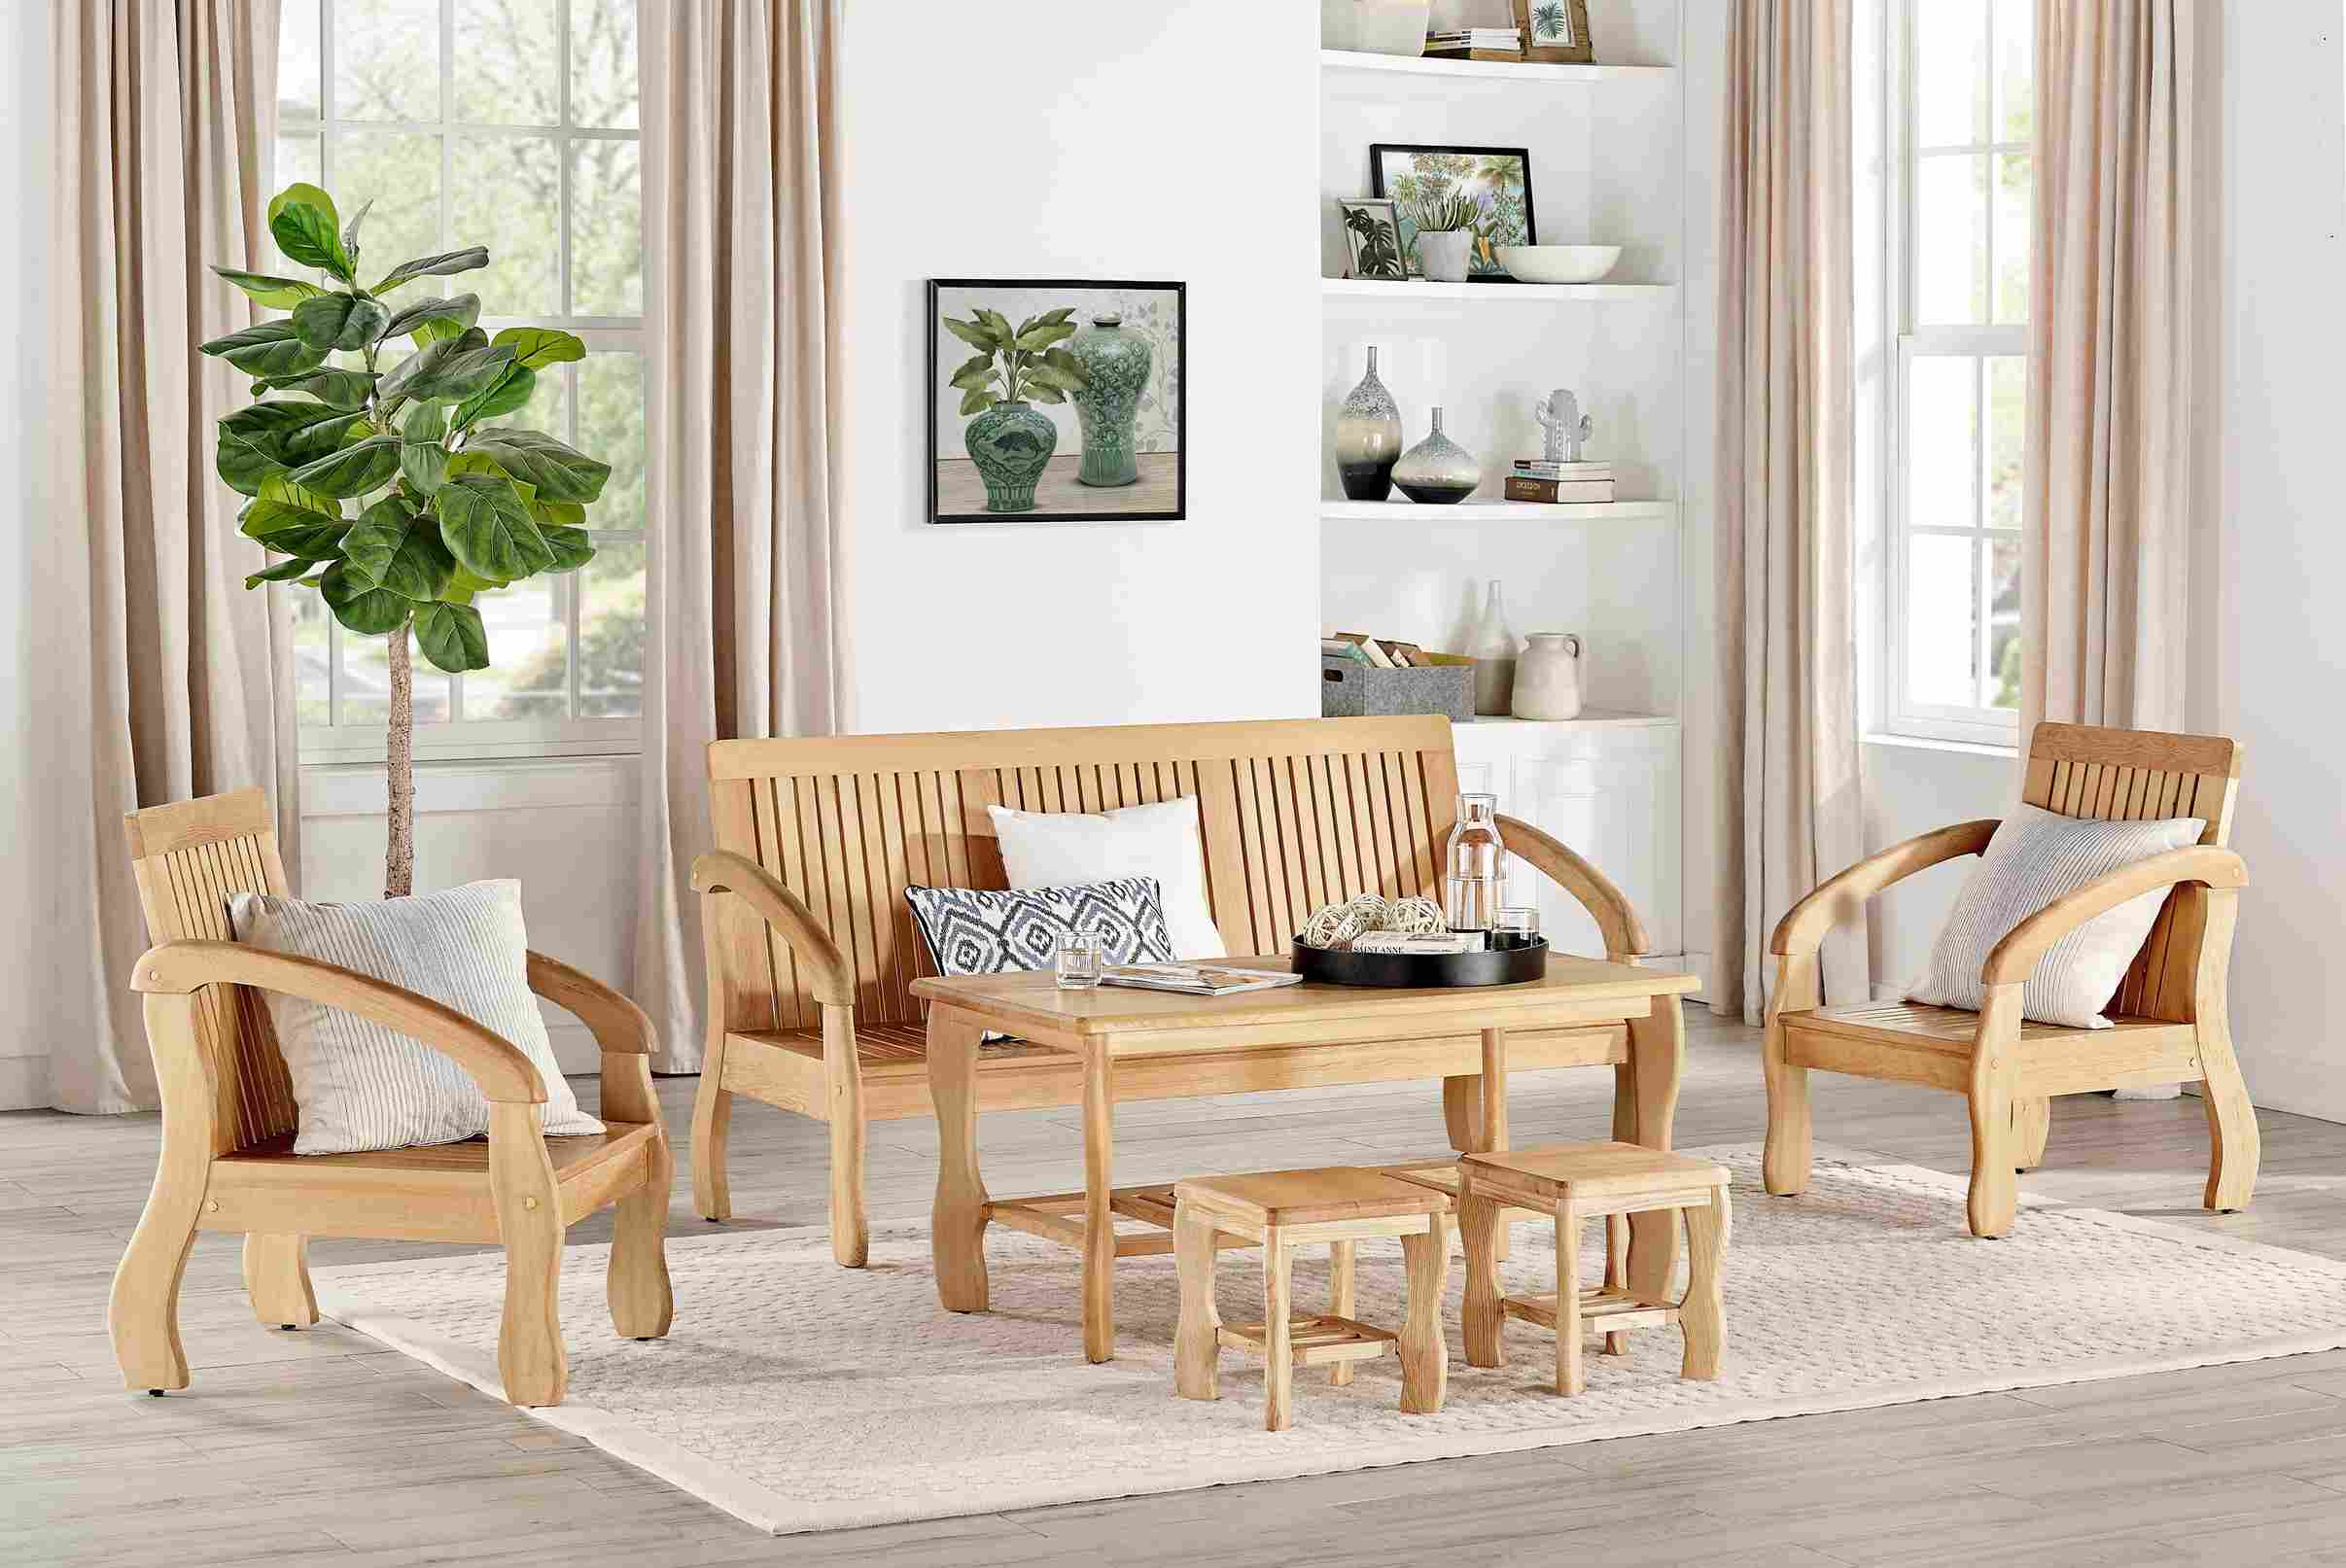 sustainable wood furniture for homes from Canadian Wood, wooden interiors